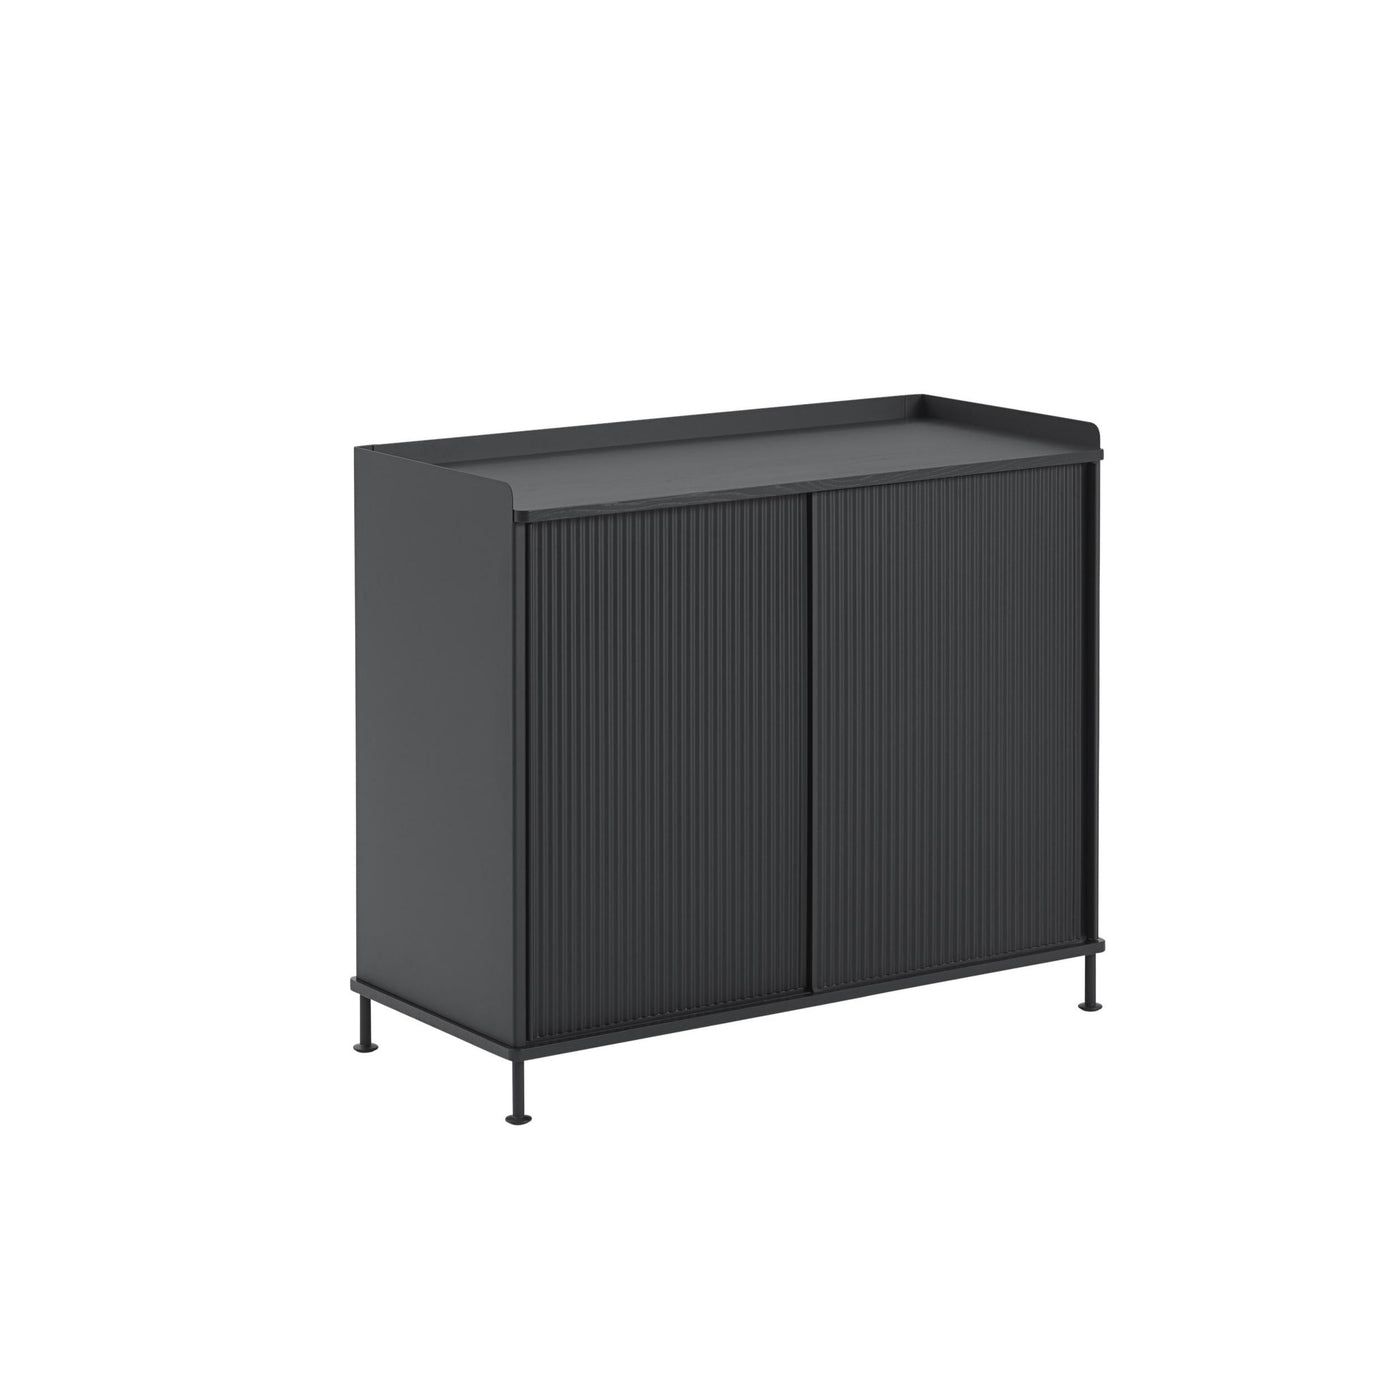 Muuto Enfold Sideboard Tall. Free UK delivery from someday designs. #colour_anthracite-black